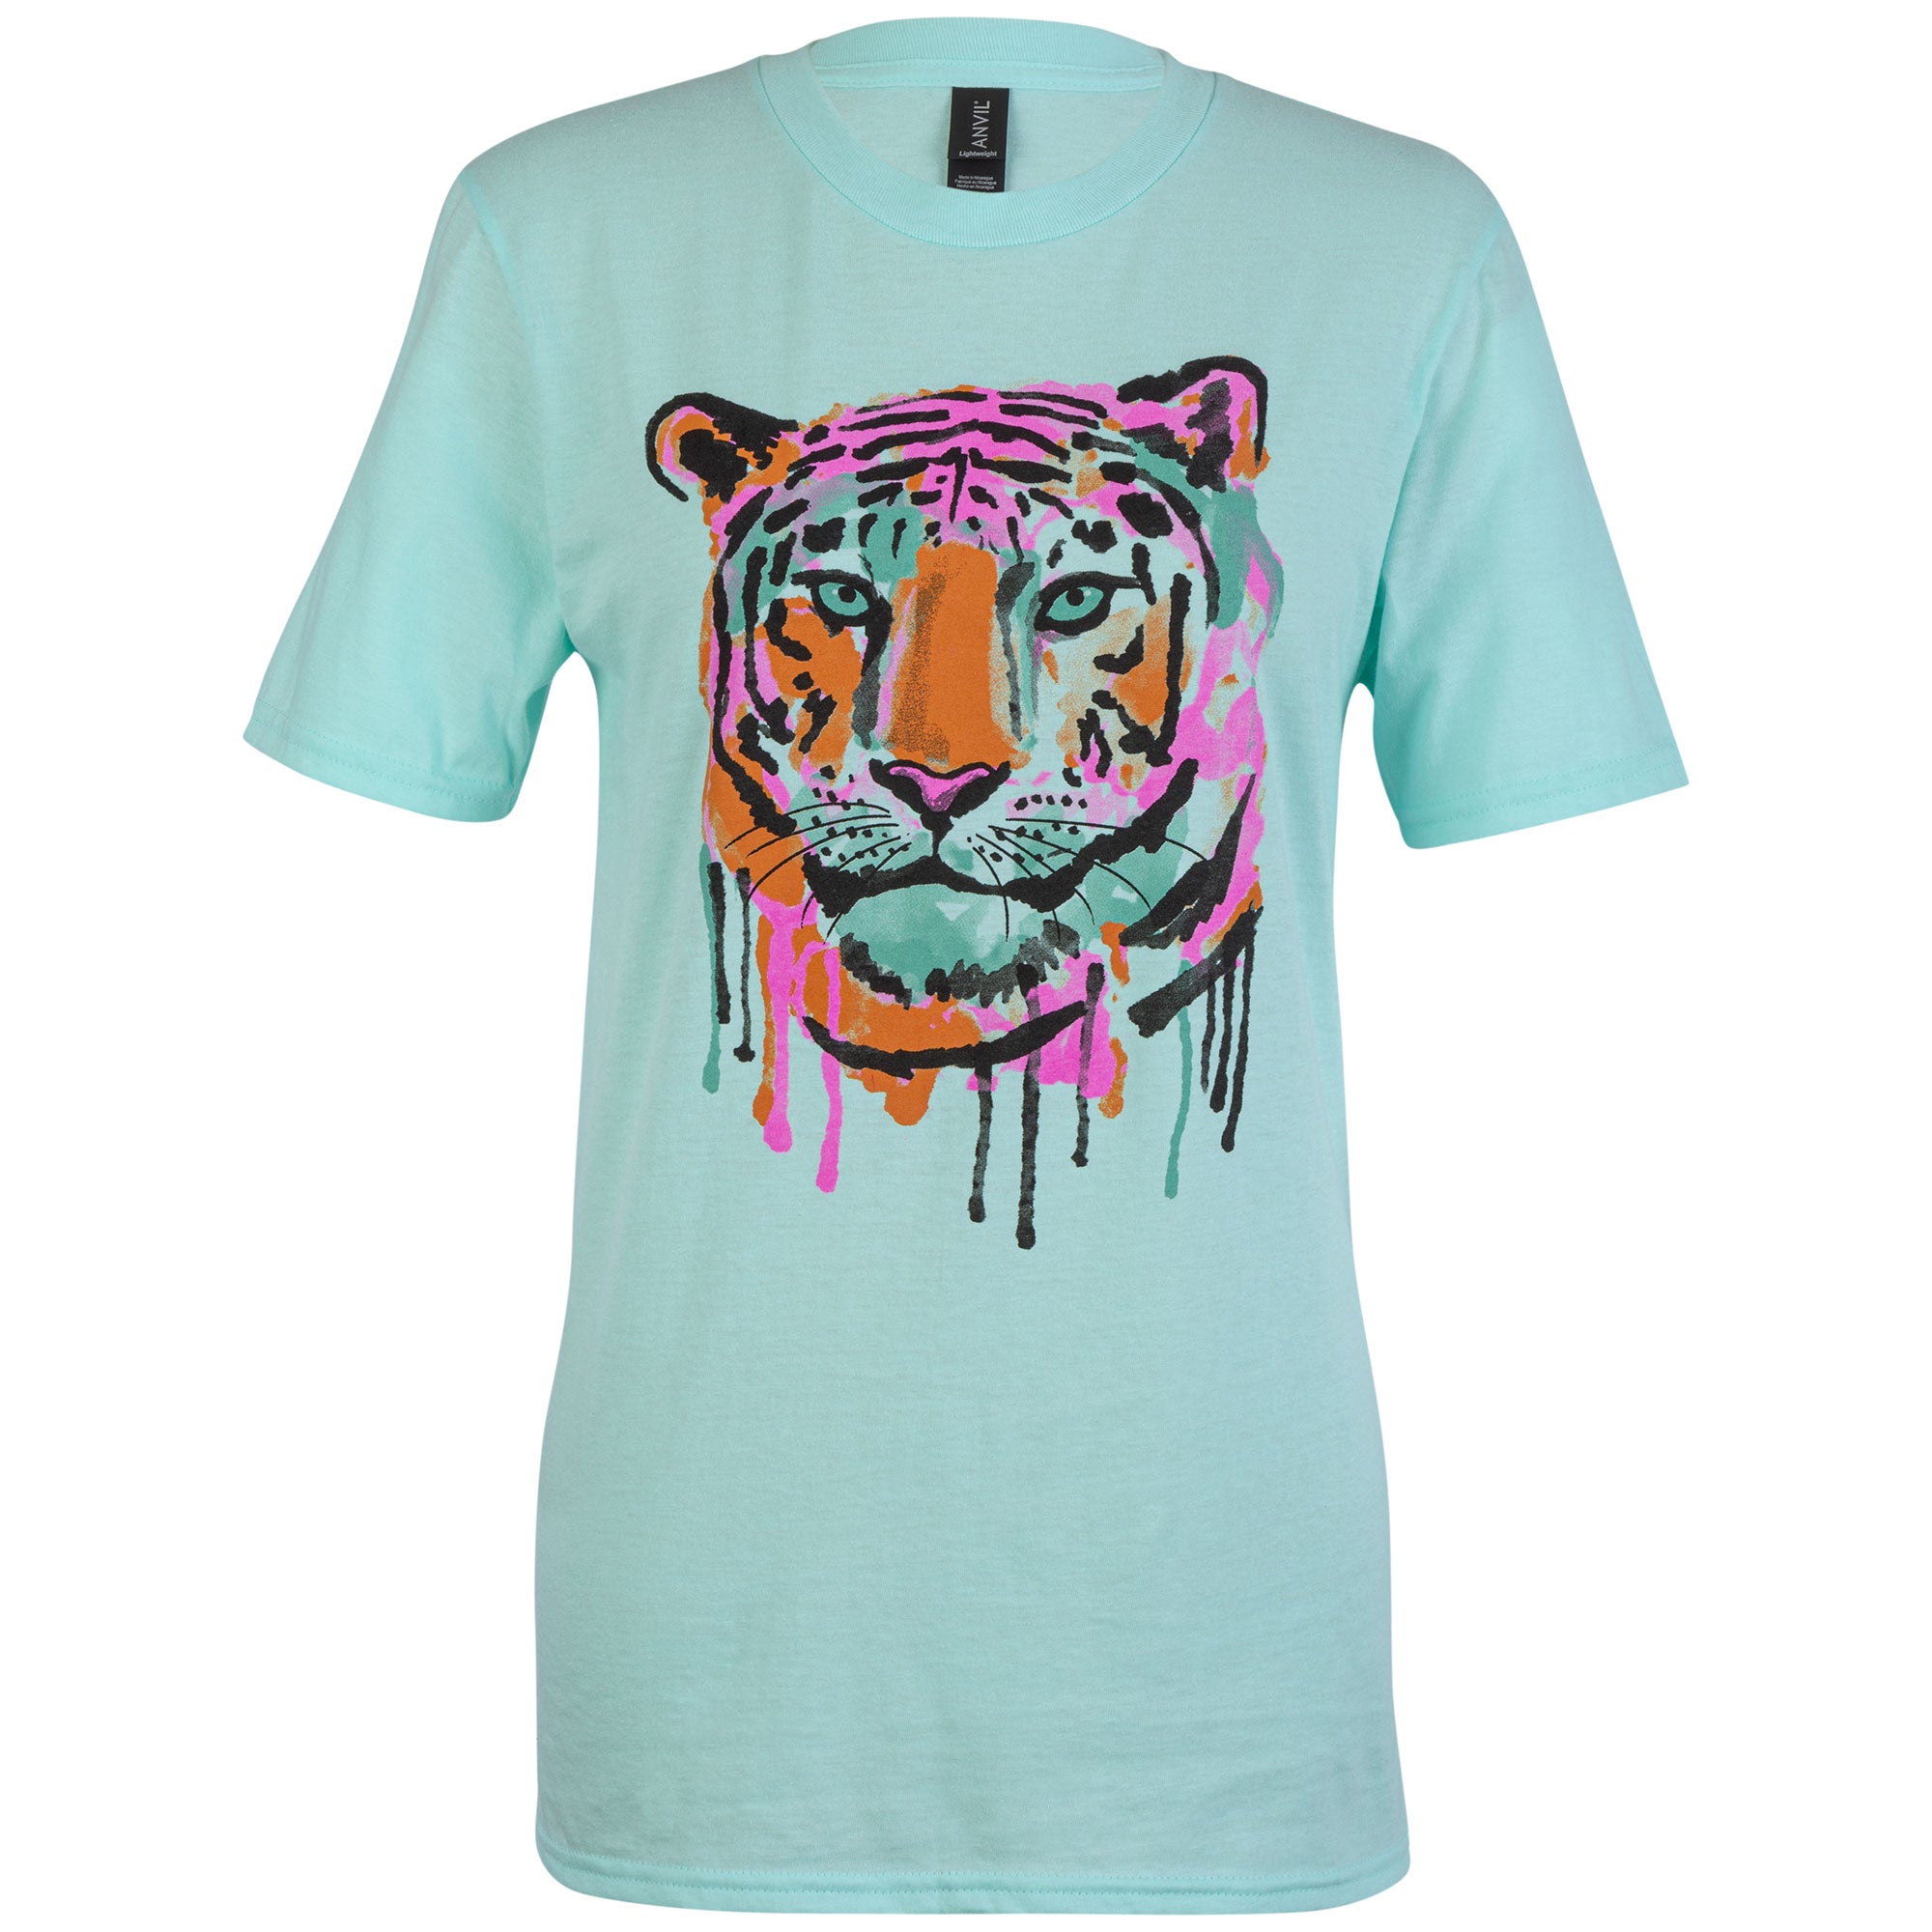 Painted Tiger T-Shirt - M